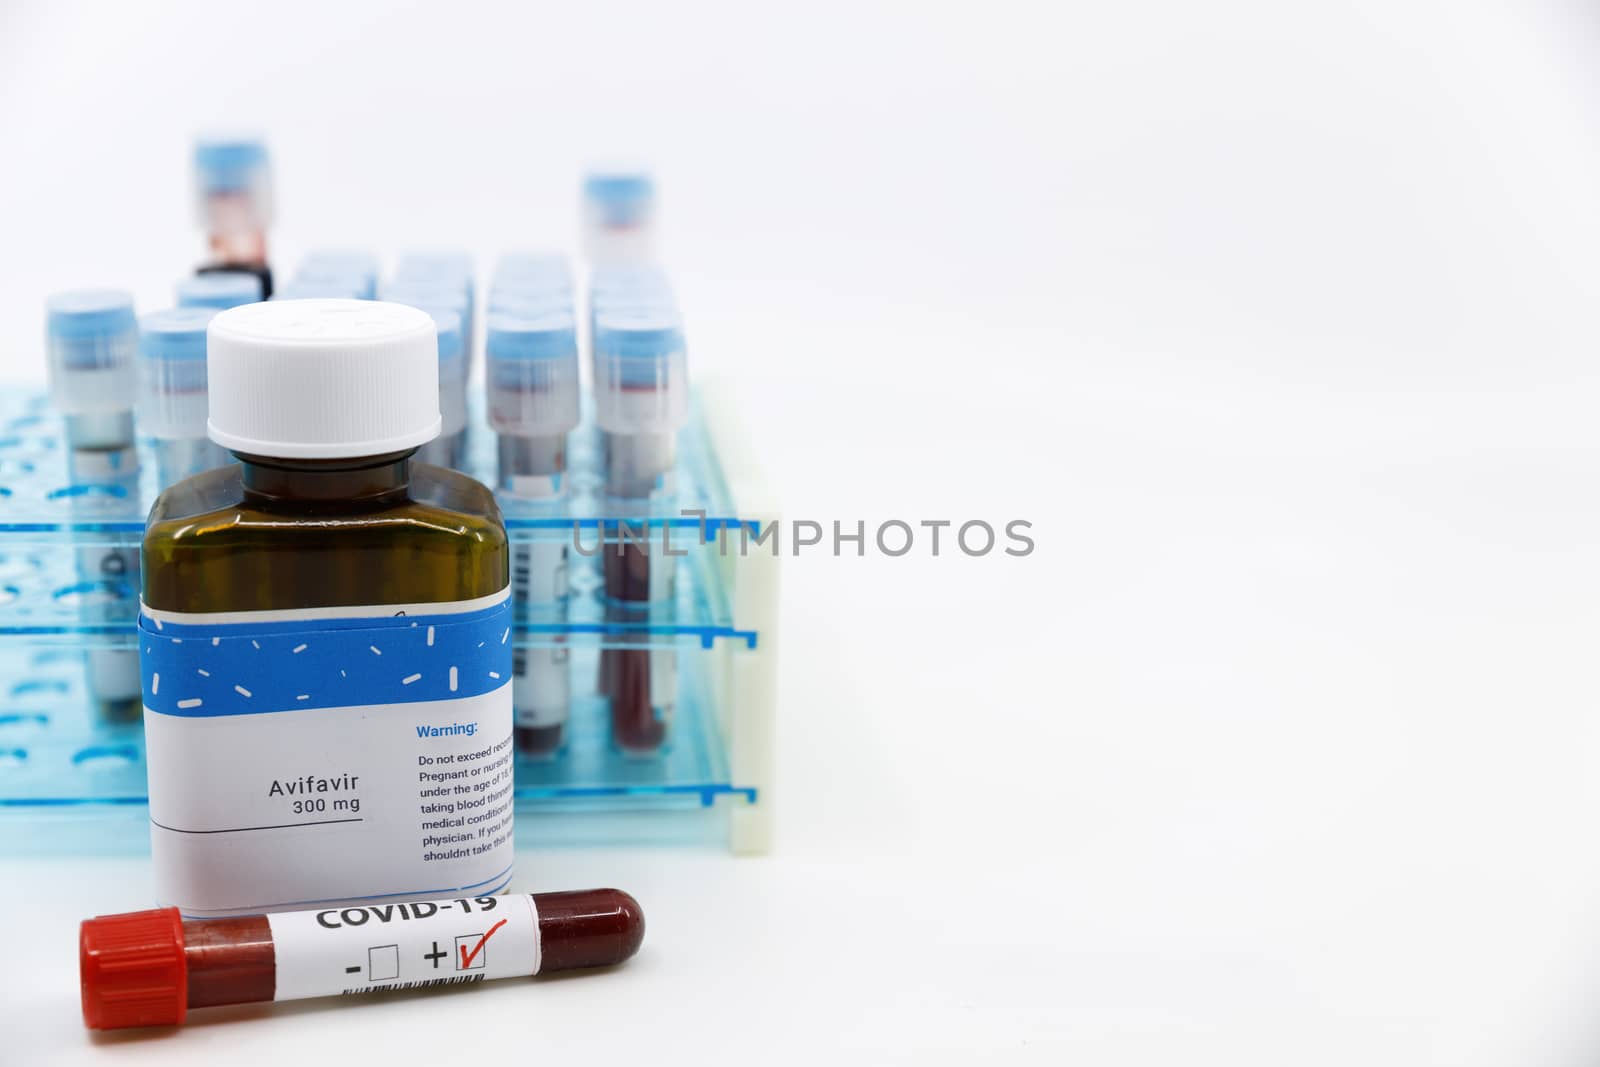 Dubai-UAE-Circa 2020:Coronavirus positive test in front of medicine.Concept of Avifavir medicine with blood tests tubes on the background.Cure for coronavirus,COVID-19 treatment. by dugulan